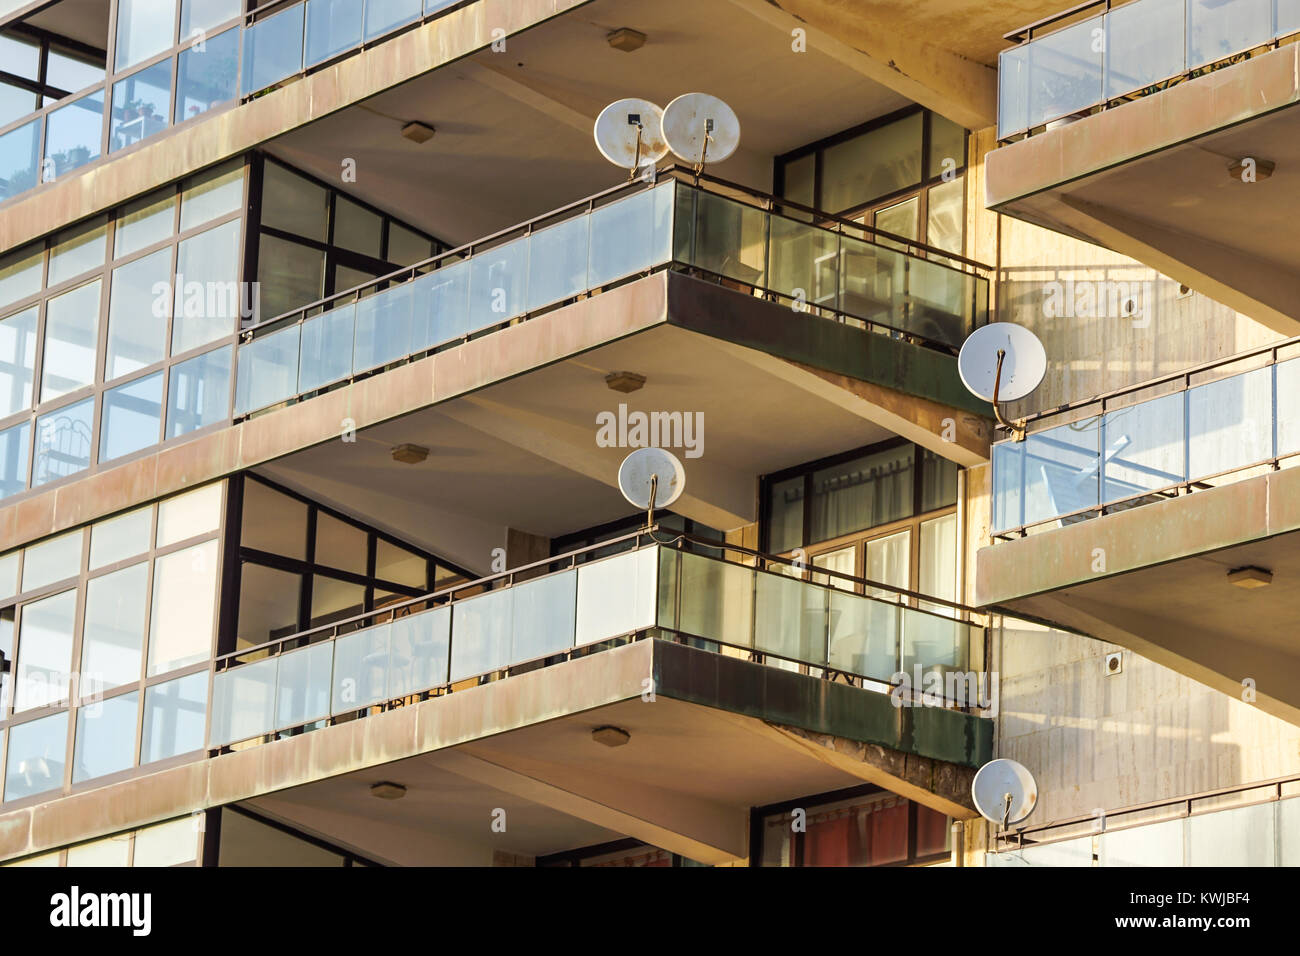 Facade of the reseidential building with windows and balconies and satelite antennas Stock Photo